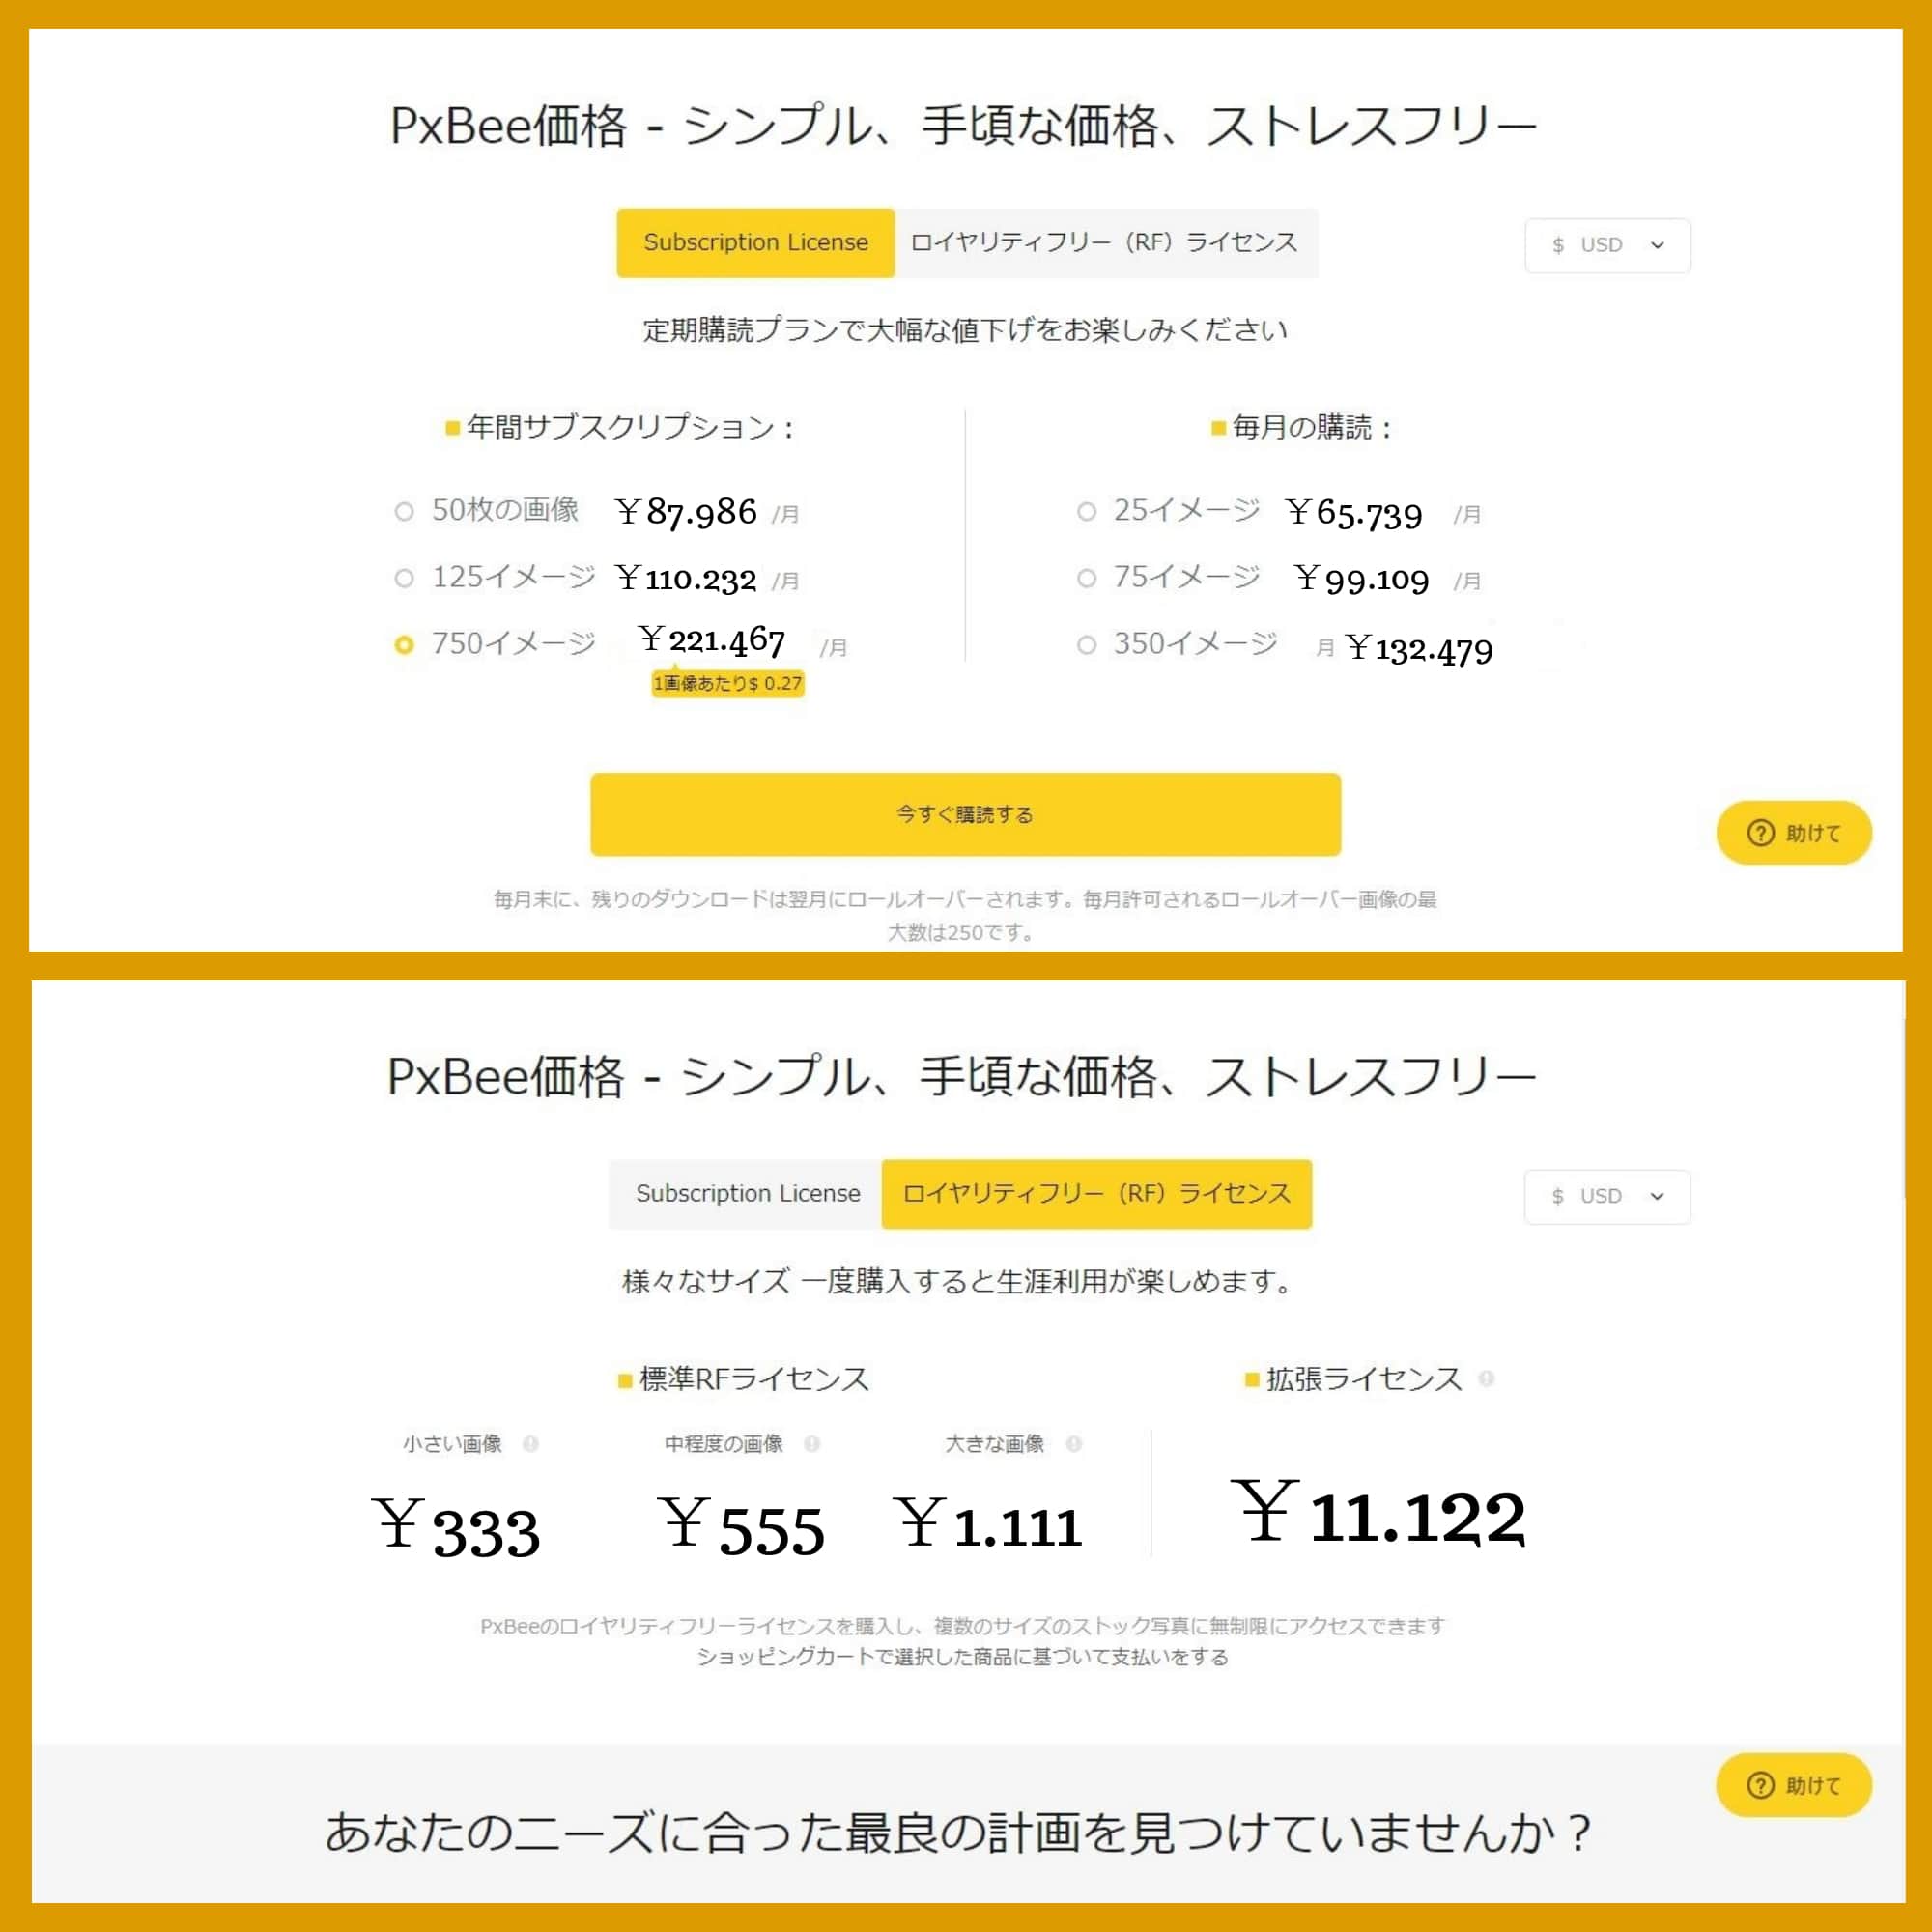 PxBee画像の日本円の金額一覧